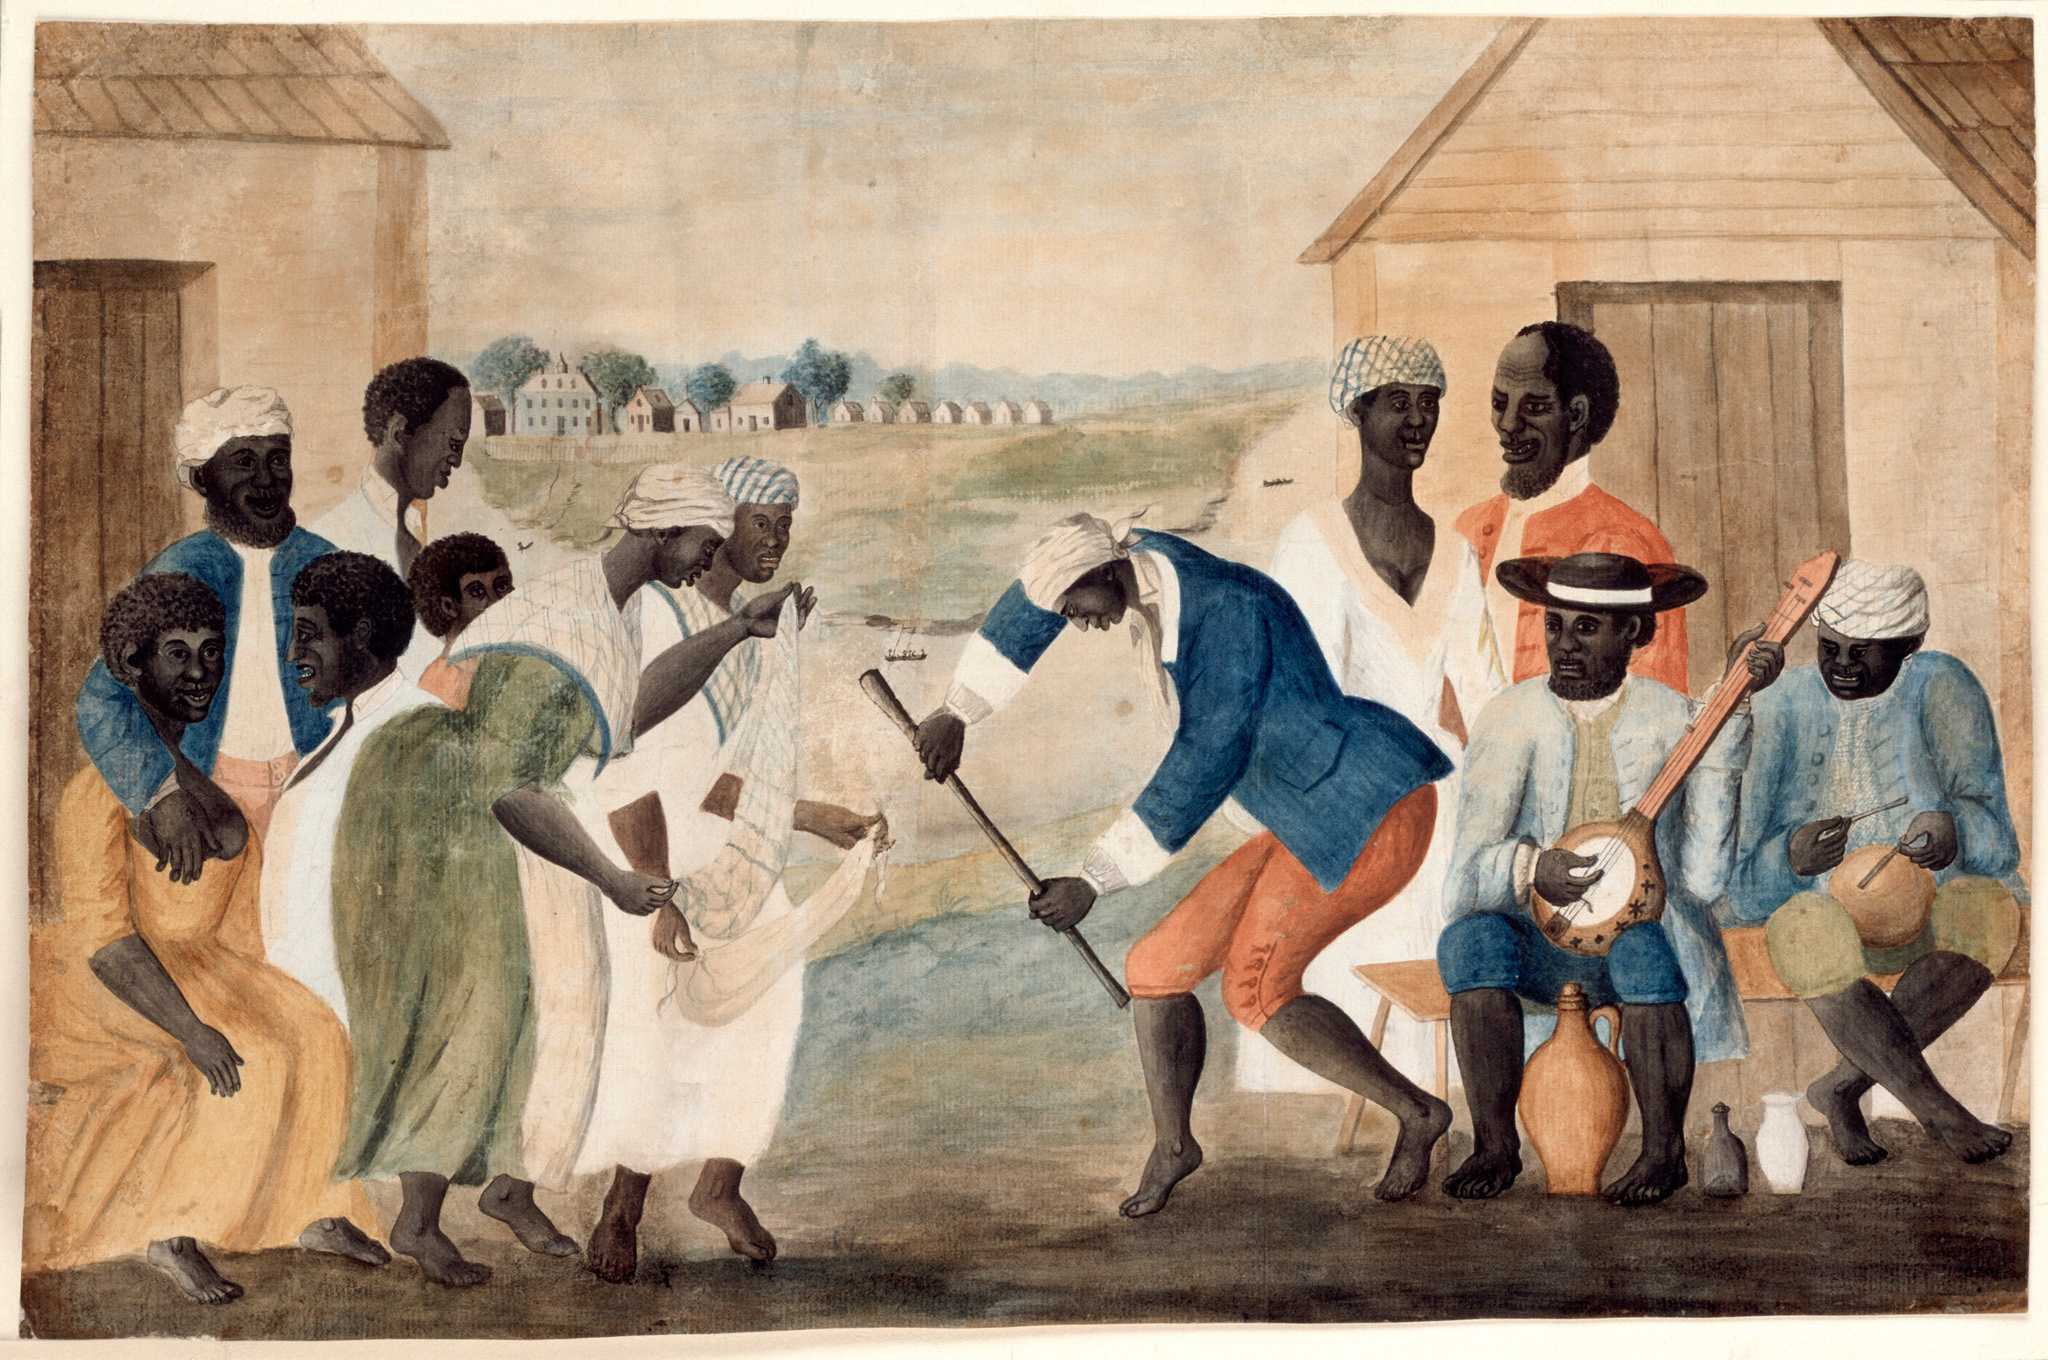 Color print showing enslaved individuals next to cabins